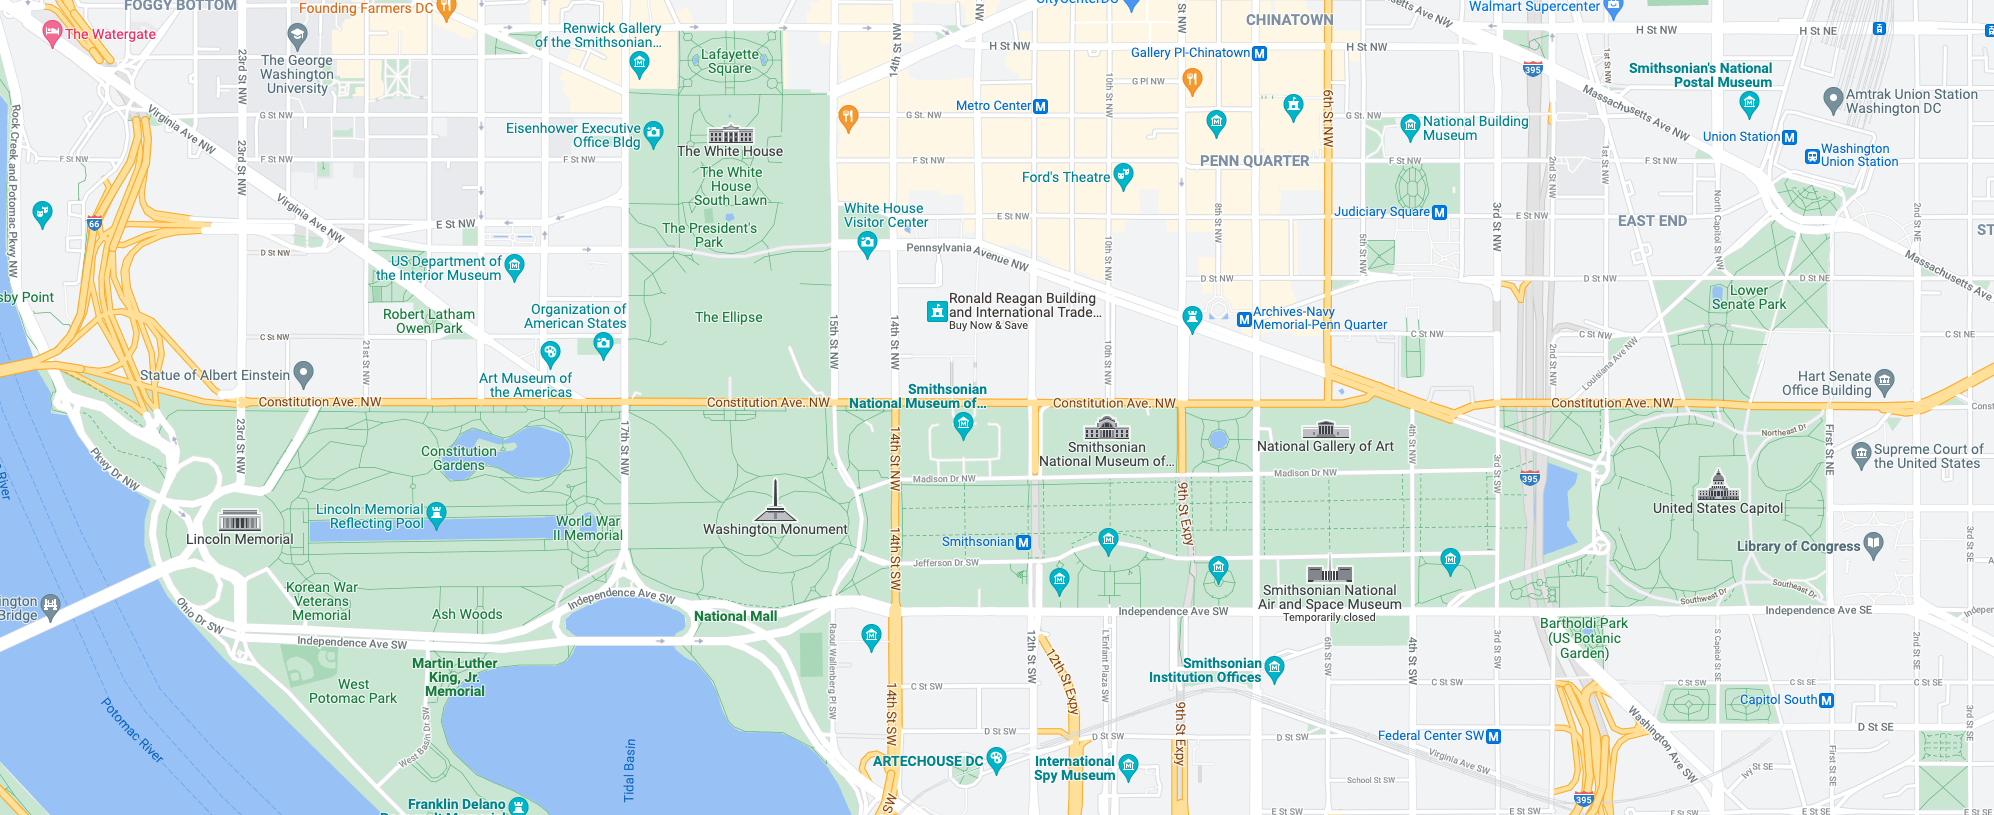 The National Mall on Google Maps